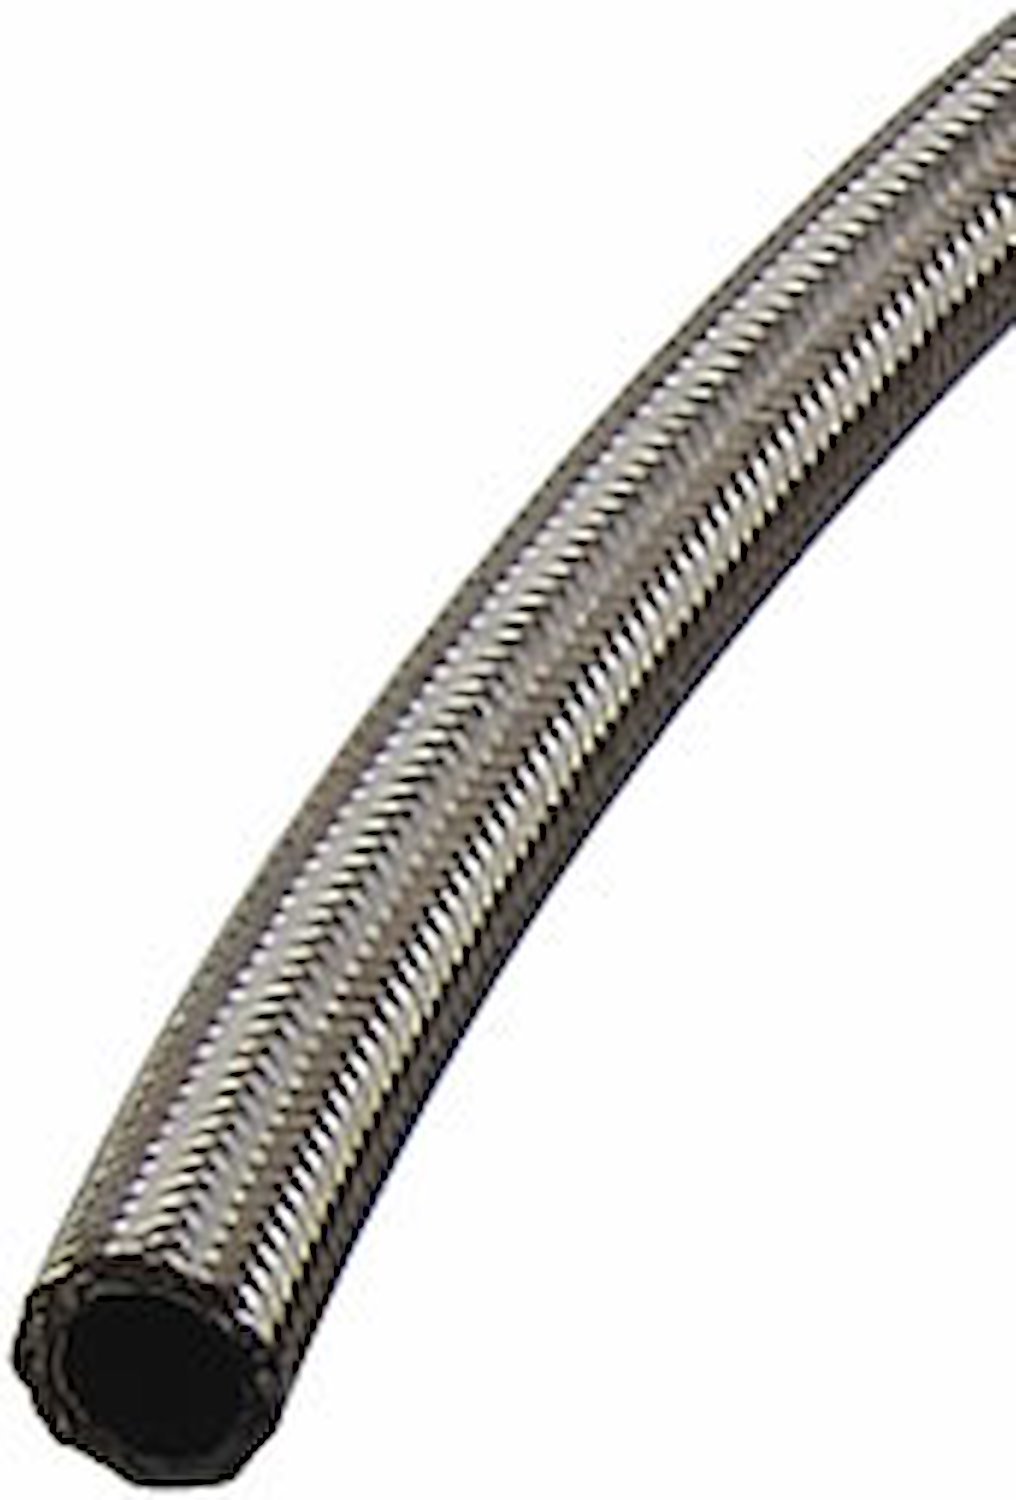 Pro-Flo 200 Series Stainless Steel Braided Hose -12 AN [6 ft.]